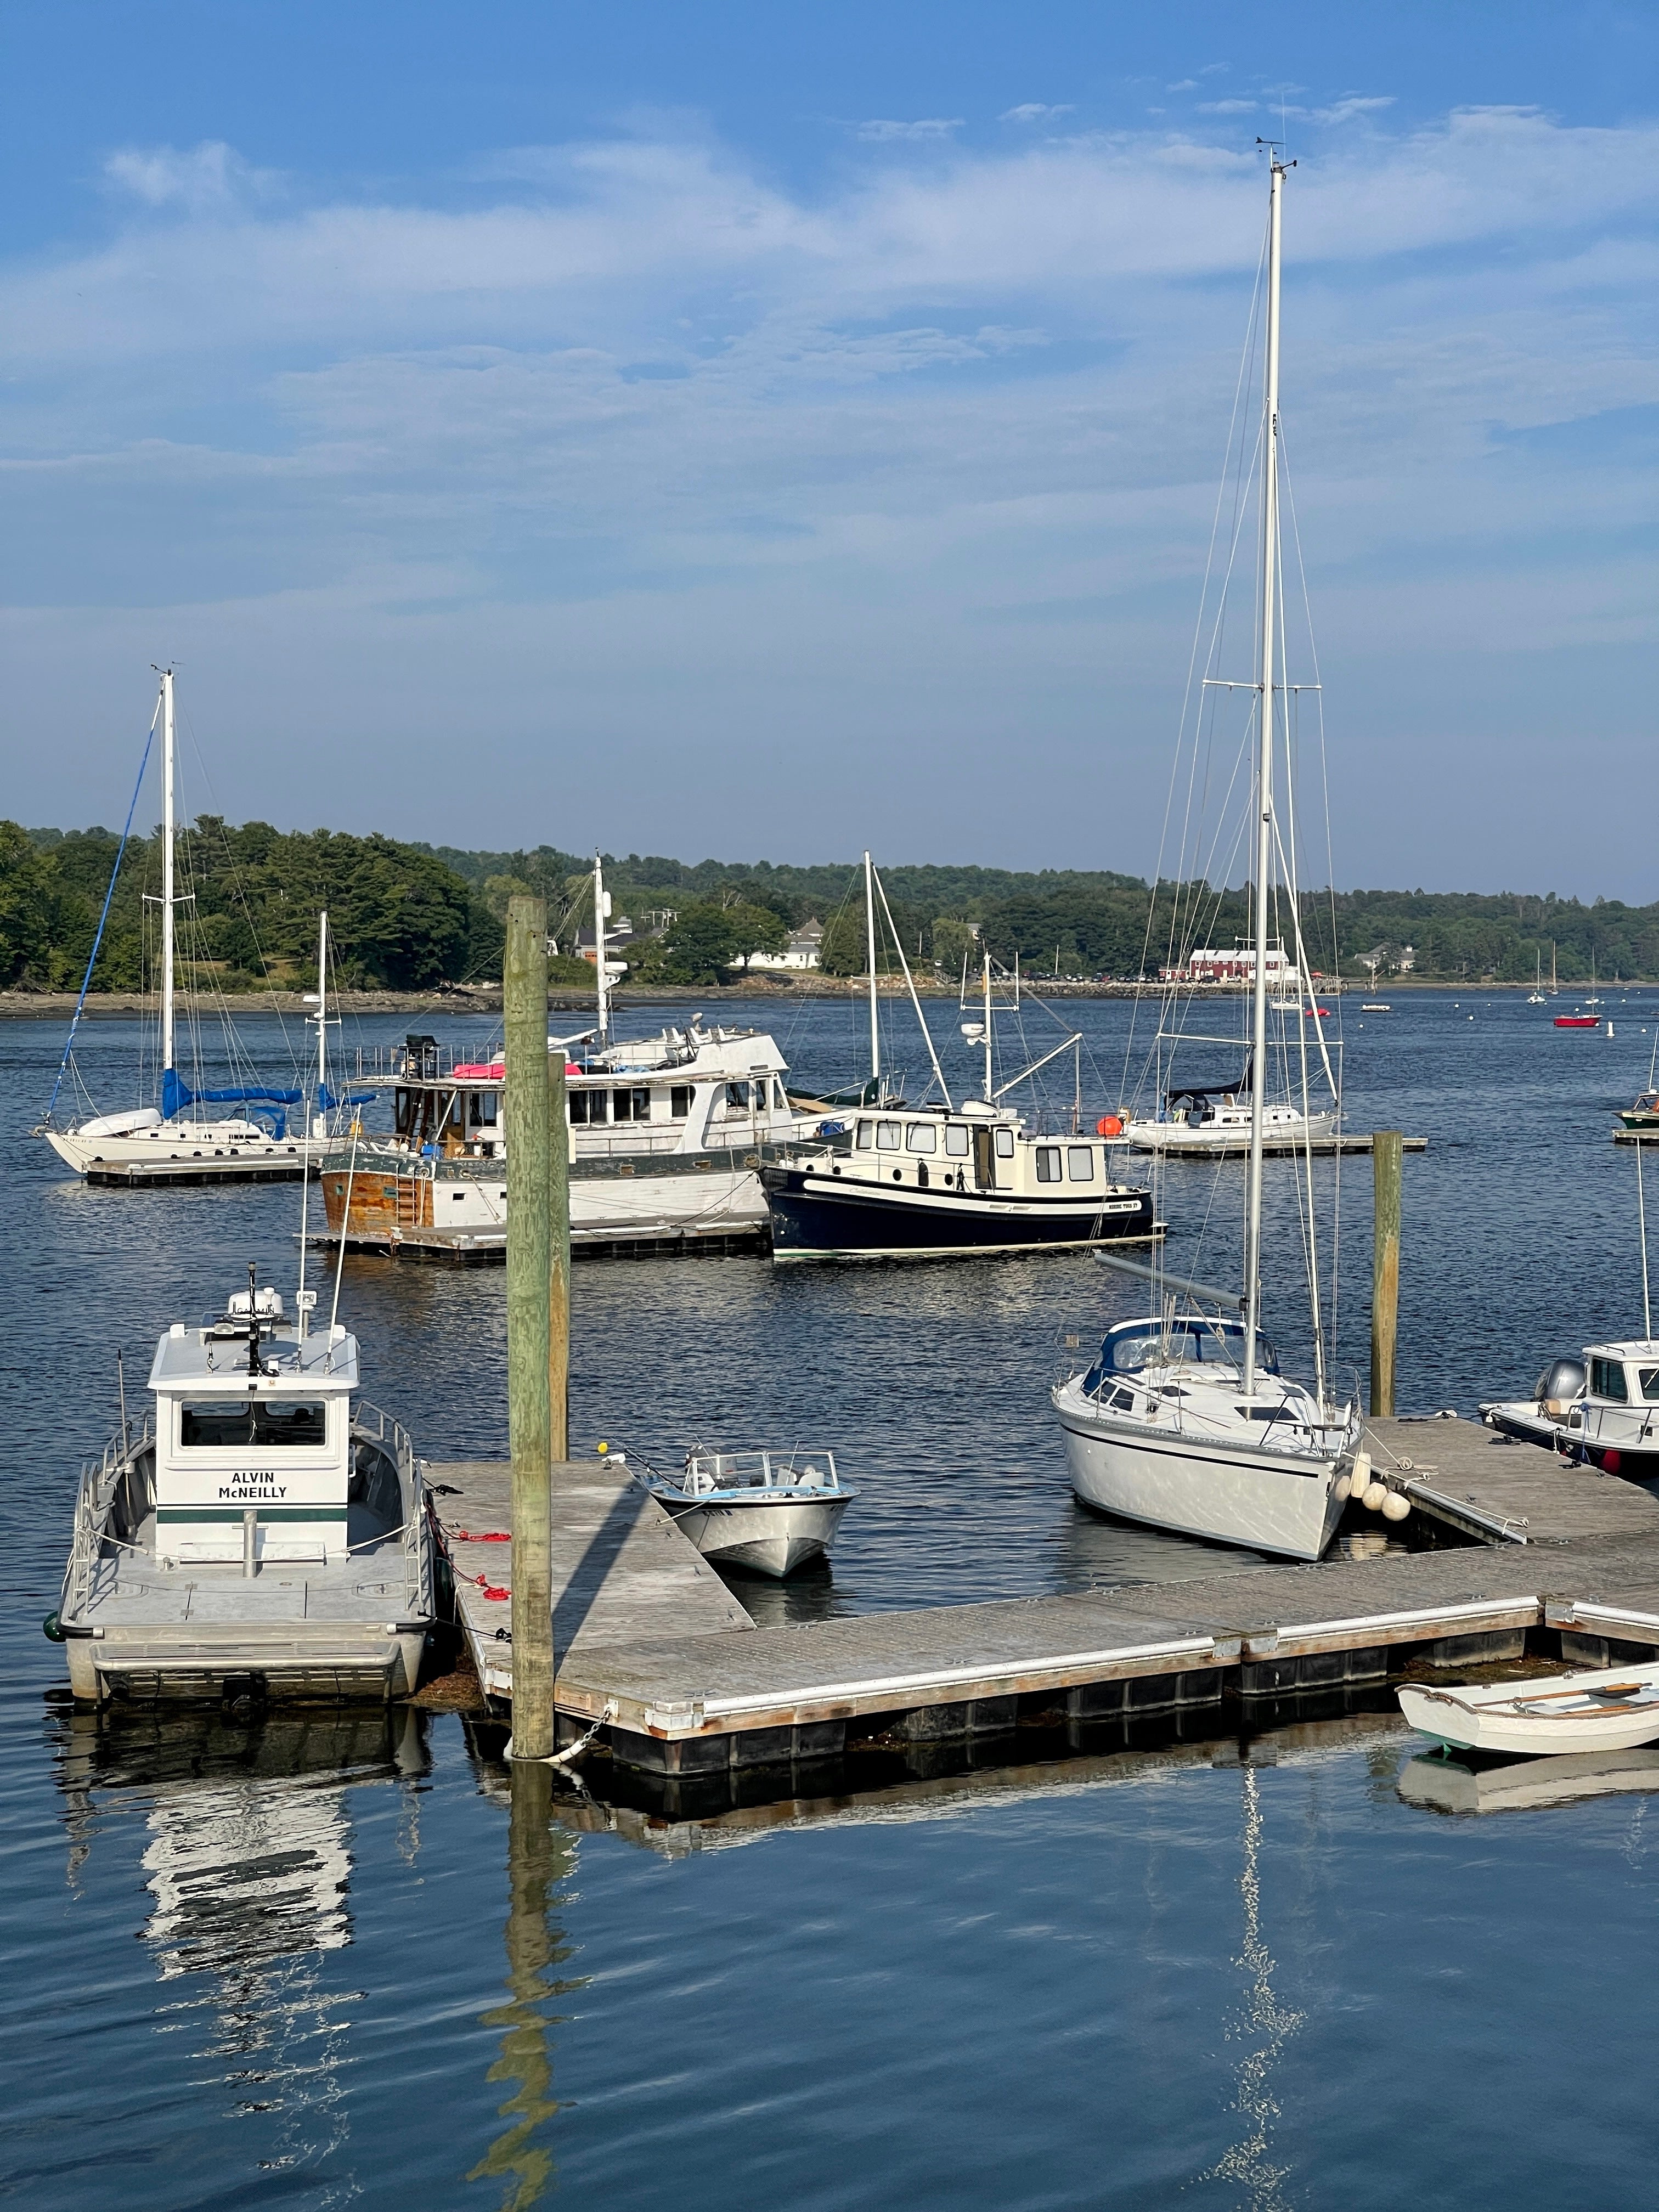 boats in the harbor in Belfast Maine